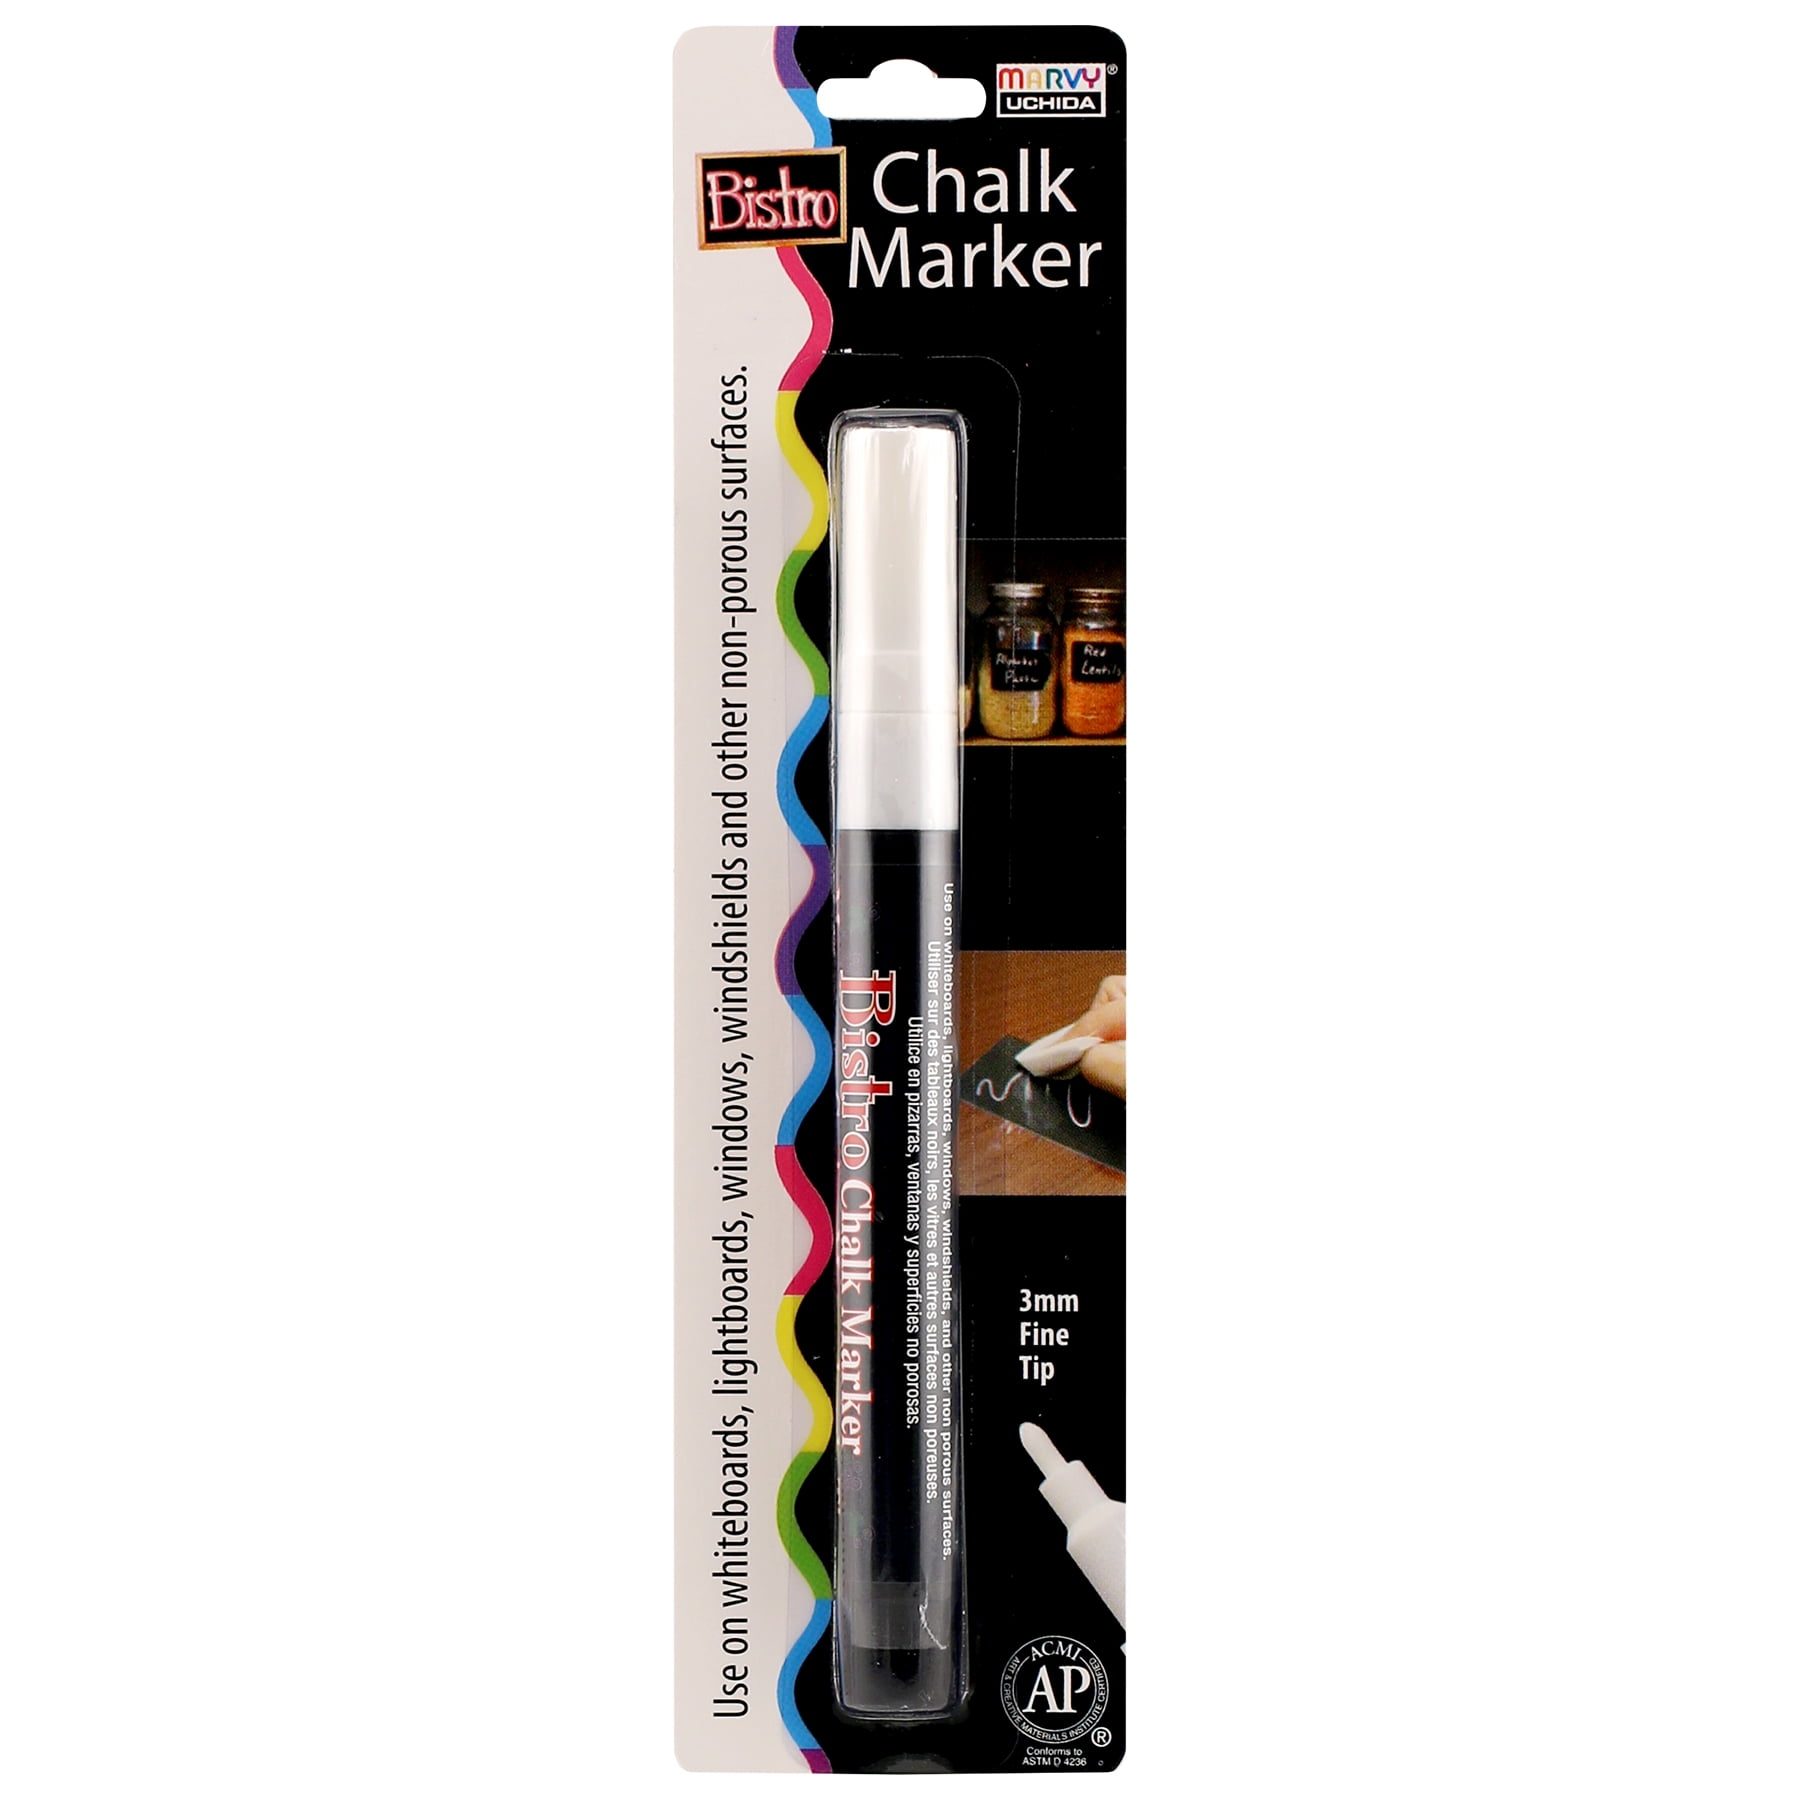 Chalk Pen : Bold White Liquid Chalk Marker with 2mm Fine Tip for Writing and Drawing - Erasable Chalkboard Label Paint Pen by Cestari Kitchen